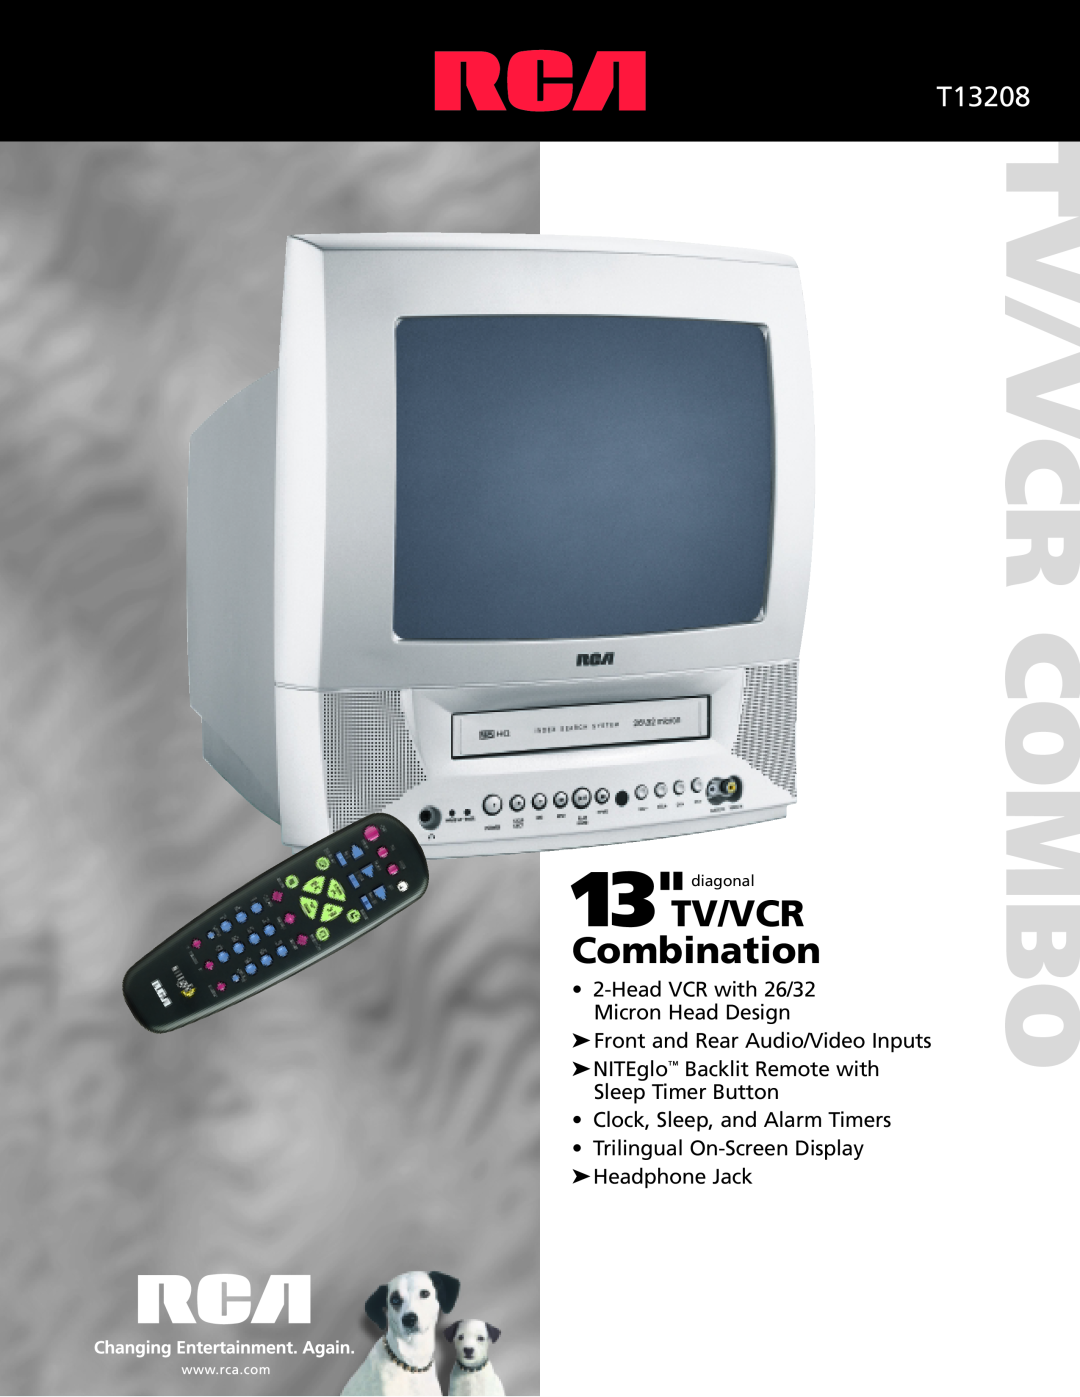 RCA T13208 manual Tv/Vcr Combo, TV/VCR Combination, HeadVCR with 26/32 Micron Head Design, Clock, Sleep, and Alarm Timers 